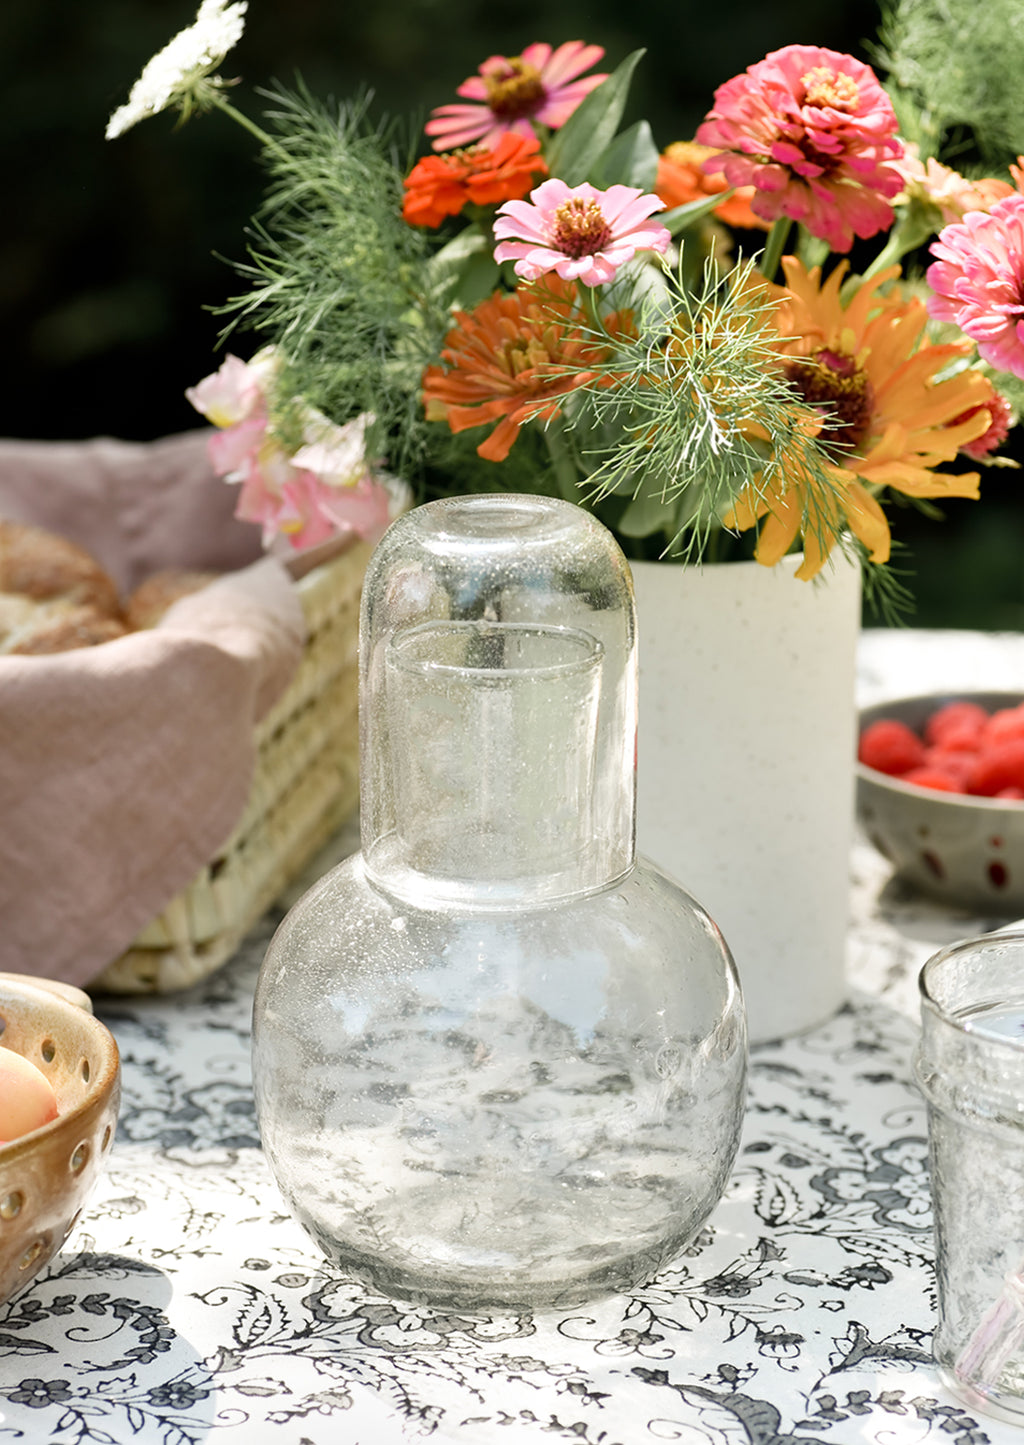 Clear: A set table with clear glass carafe.